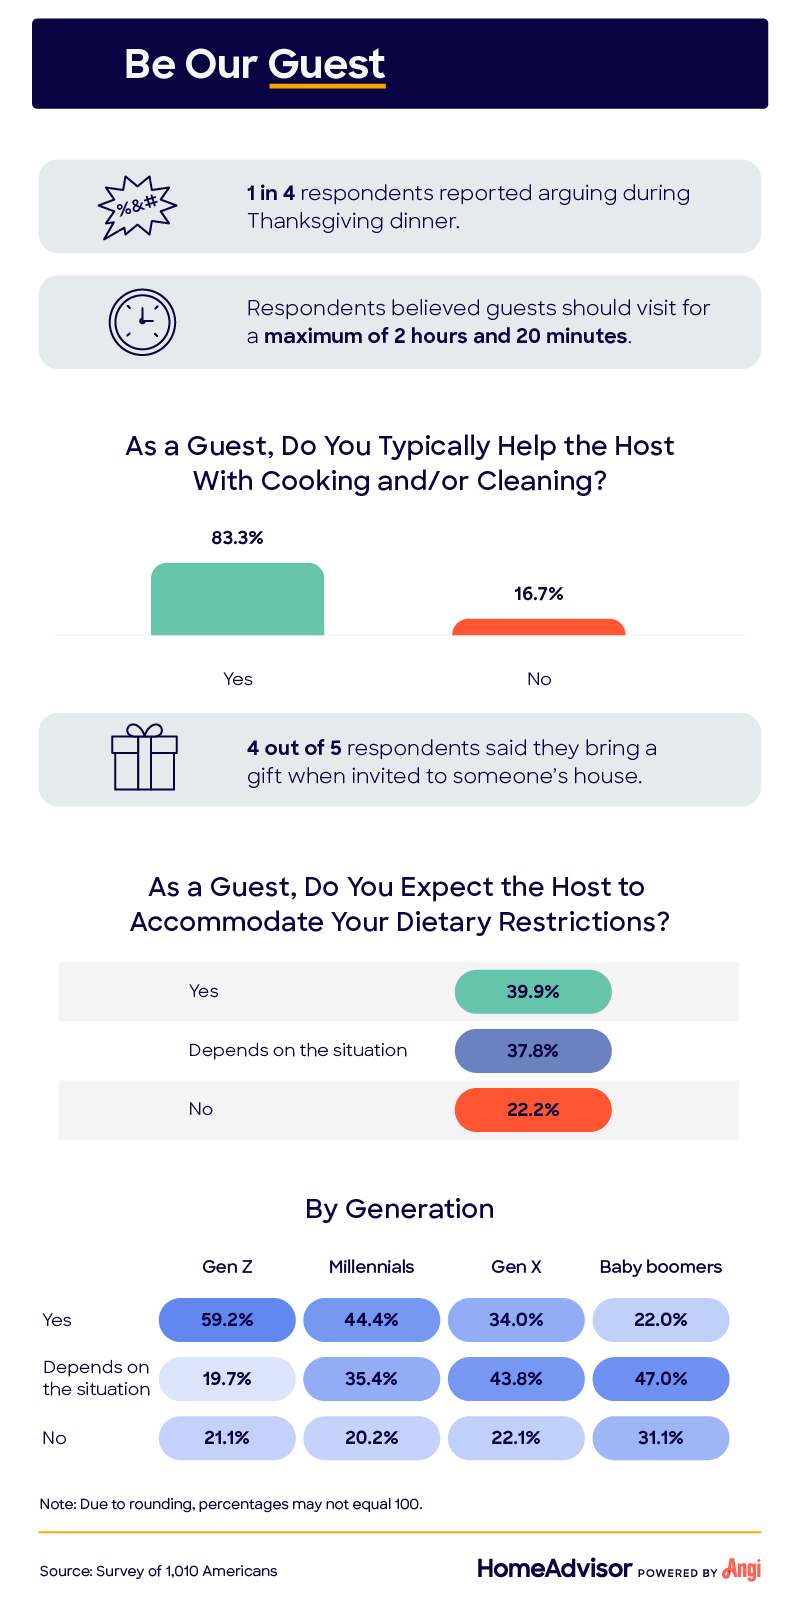 Be Our Guest: survey respondents detail how they behave as guests